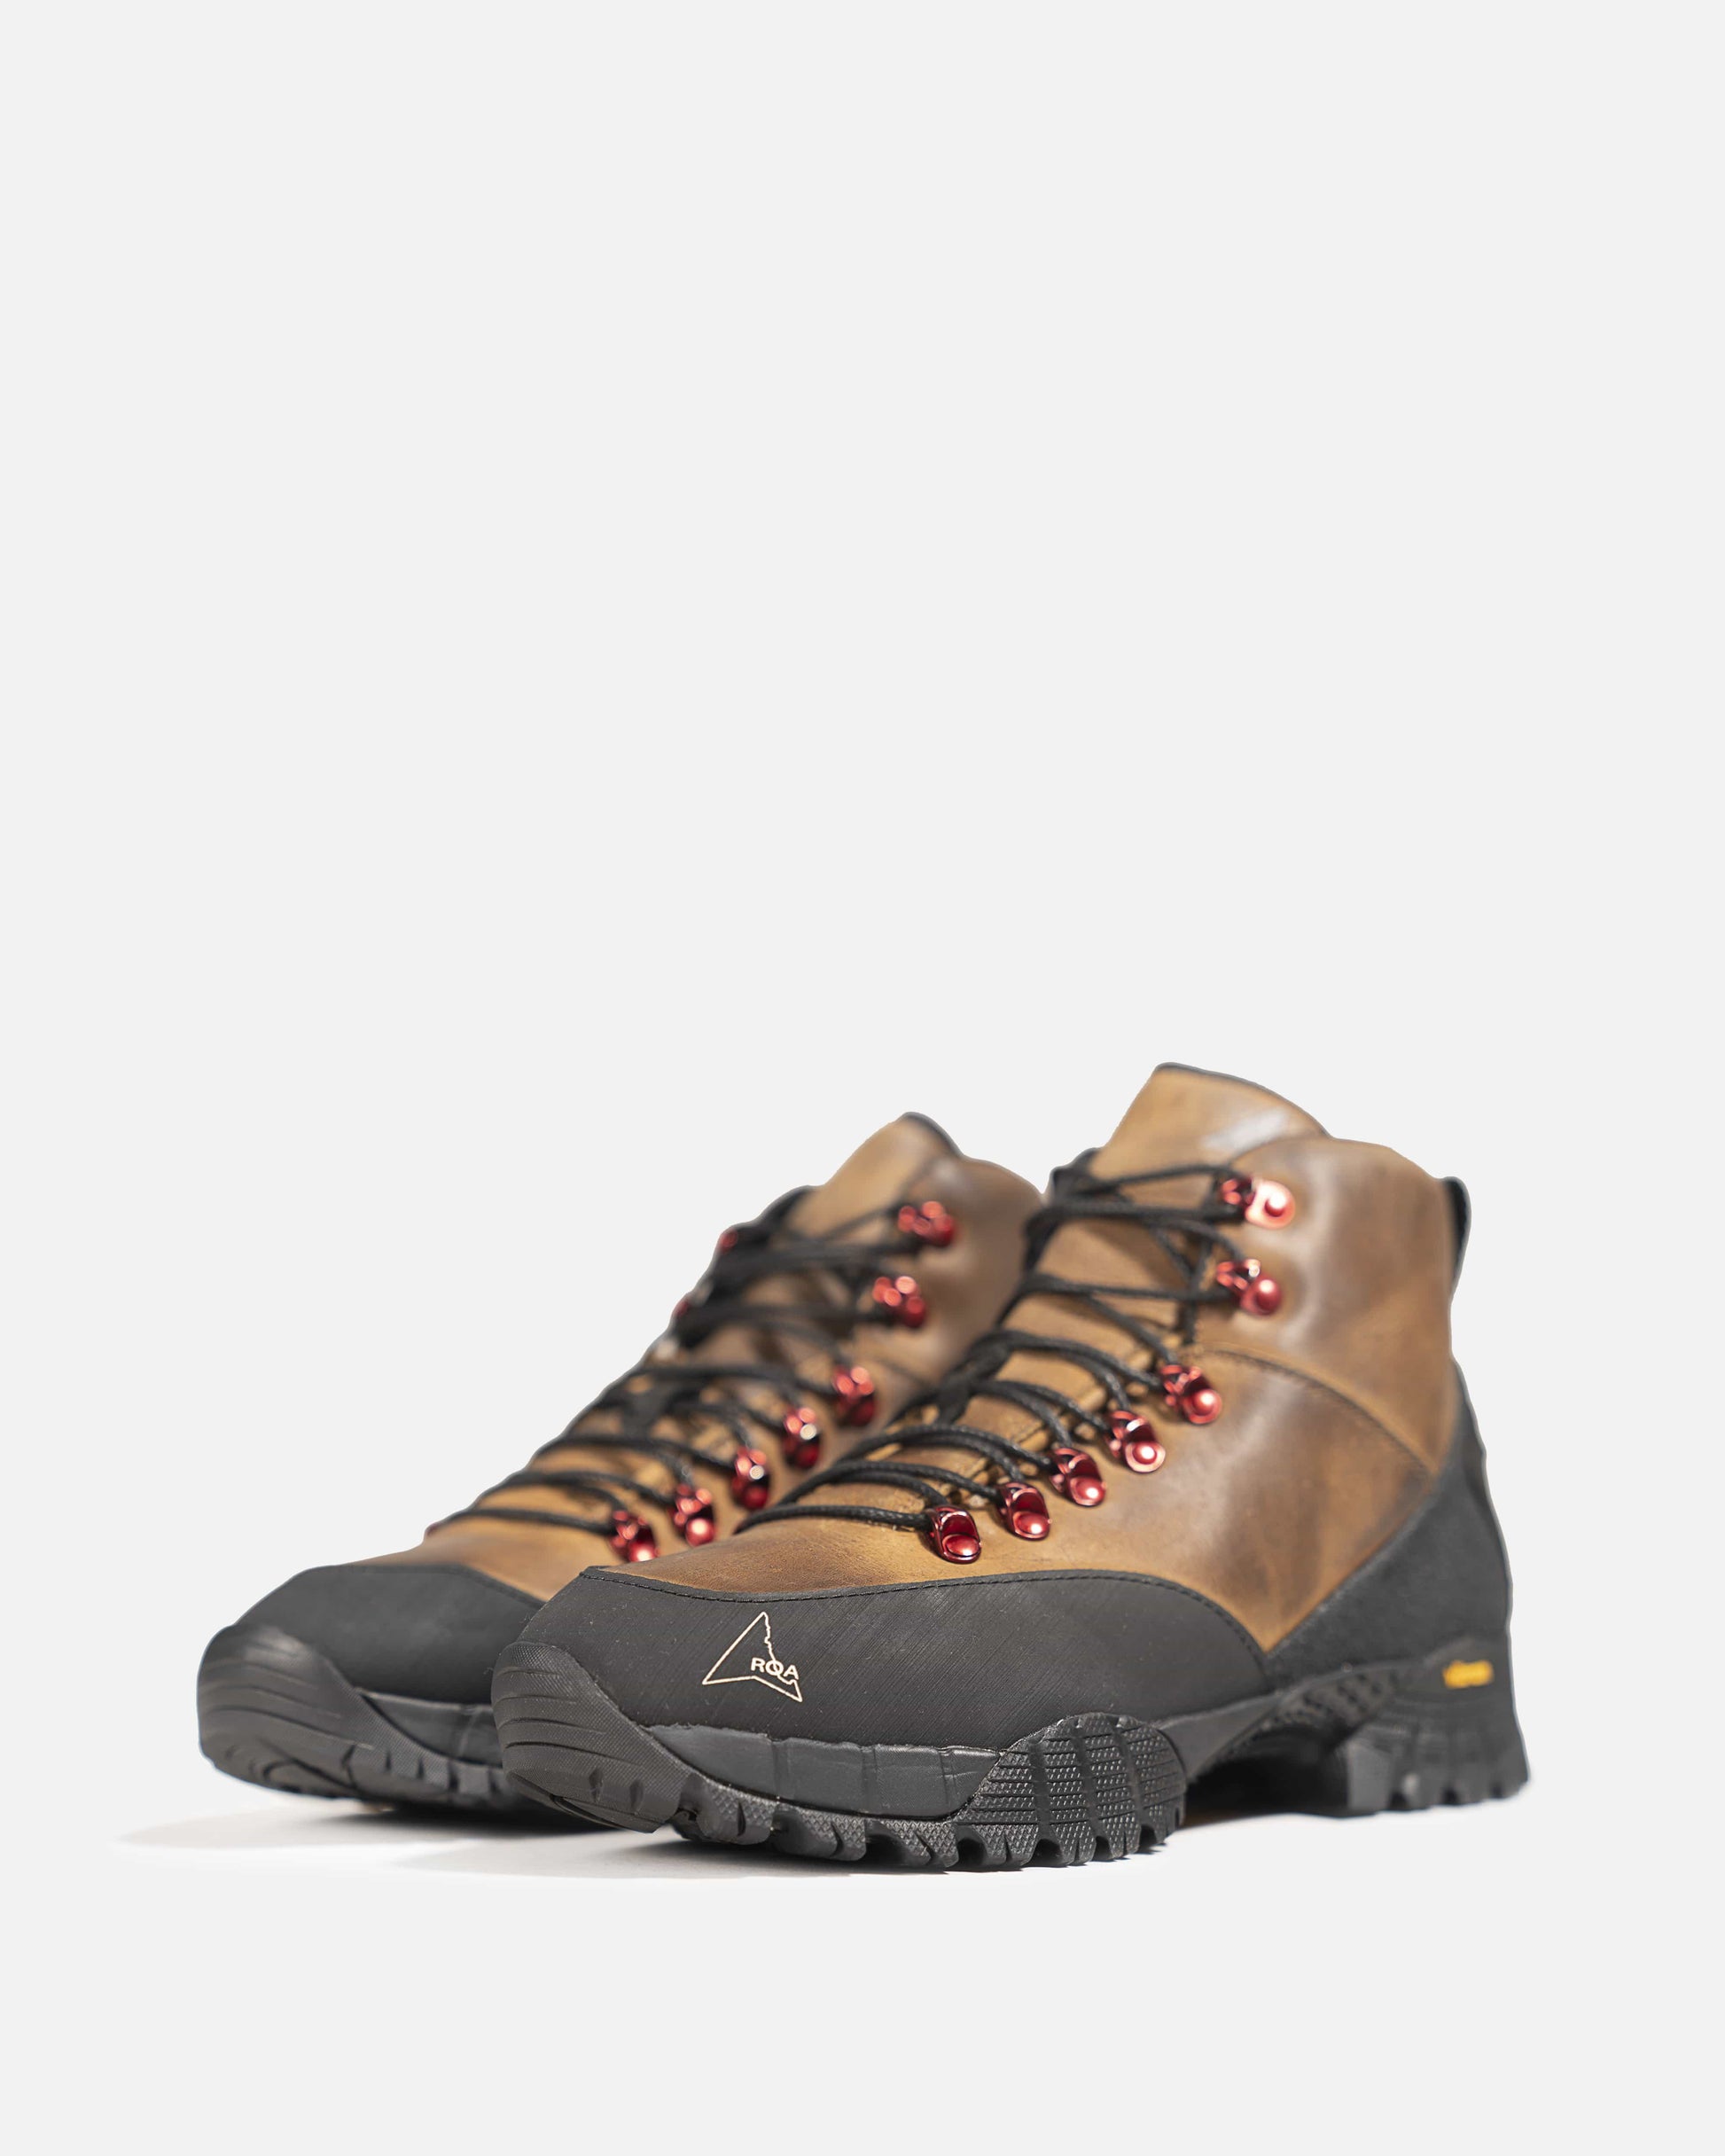 Roa Men's Boots Andreas Hiking Boot in Noix